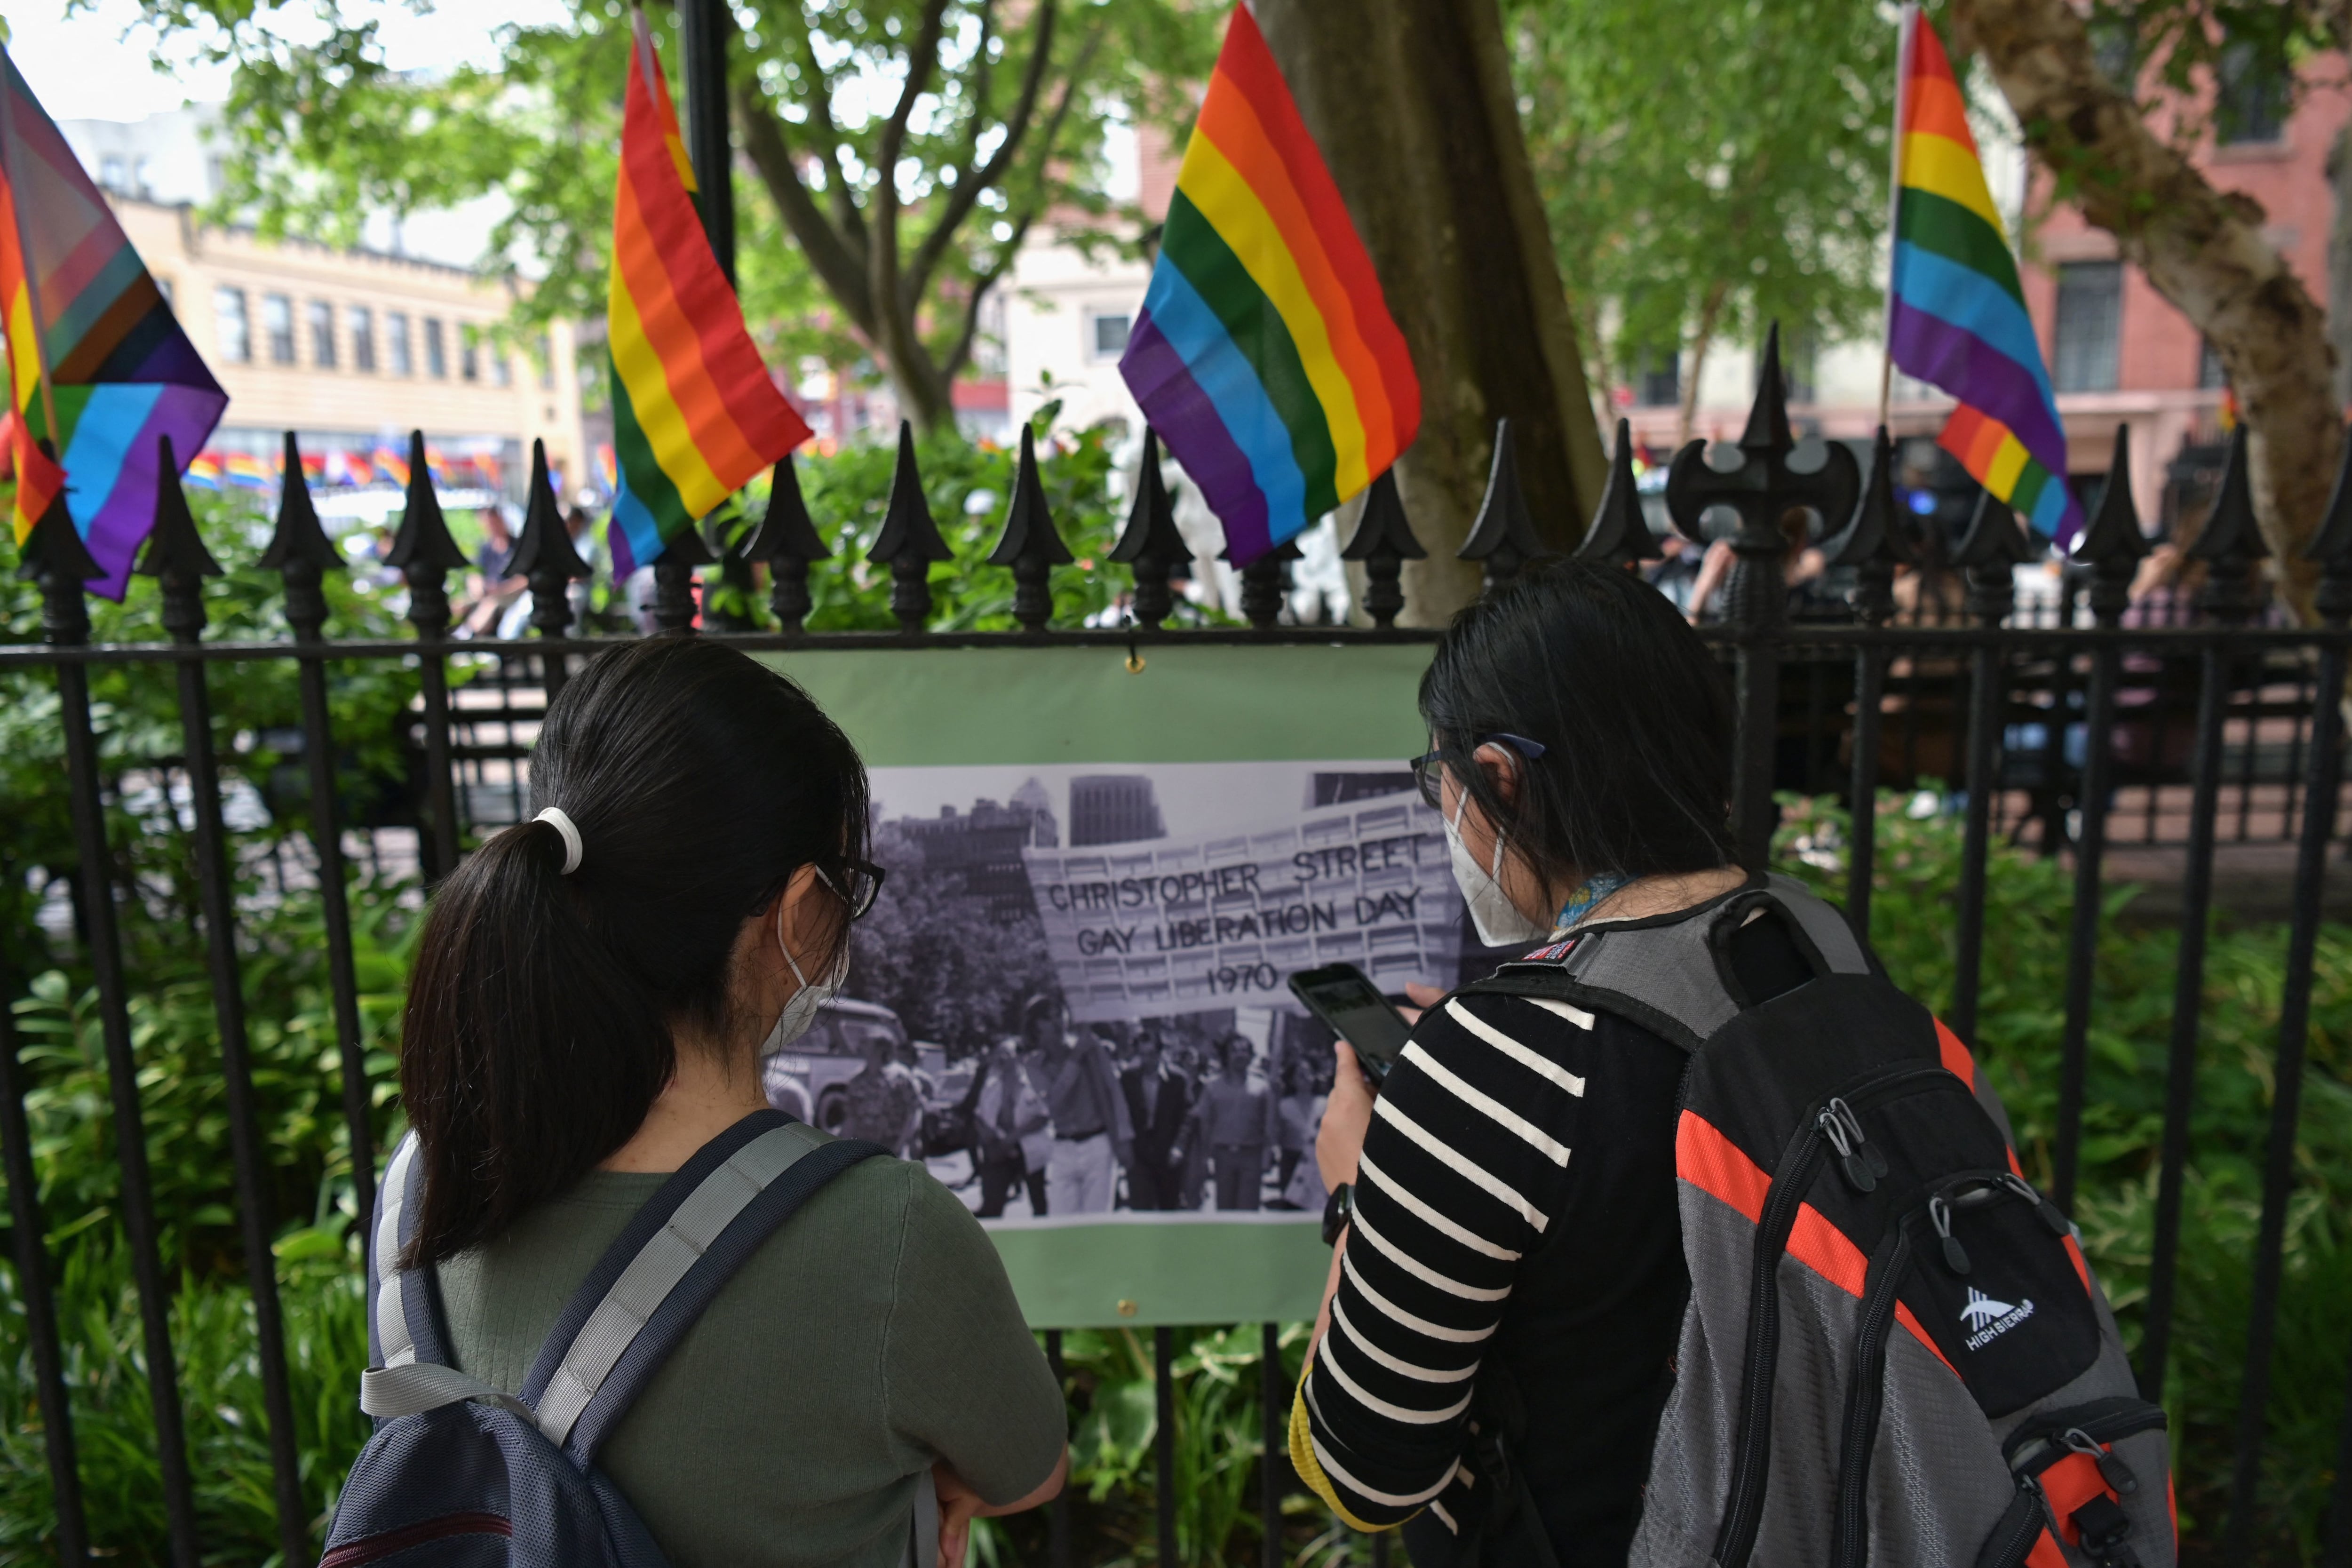 Two young women look at a historical photograph outside of the Stonewall National Monument in New York City, with Pride flags marking the top of a metal fence.